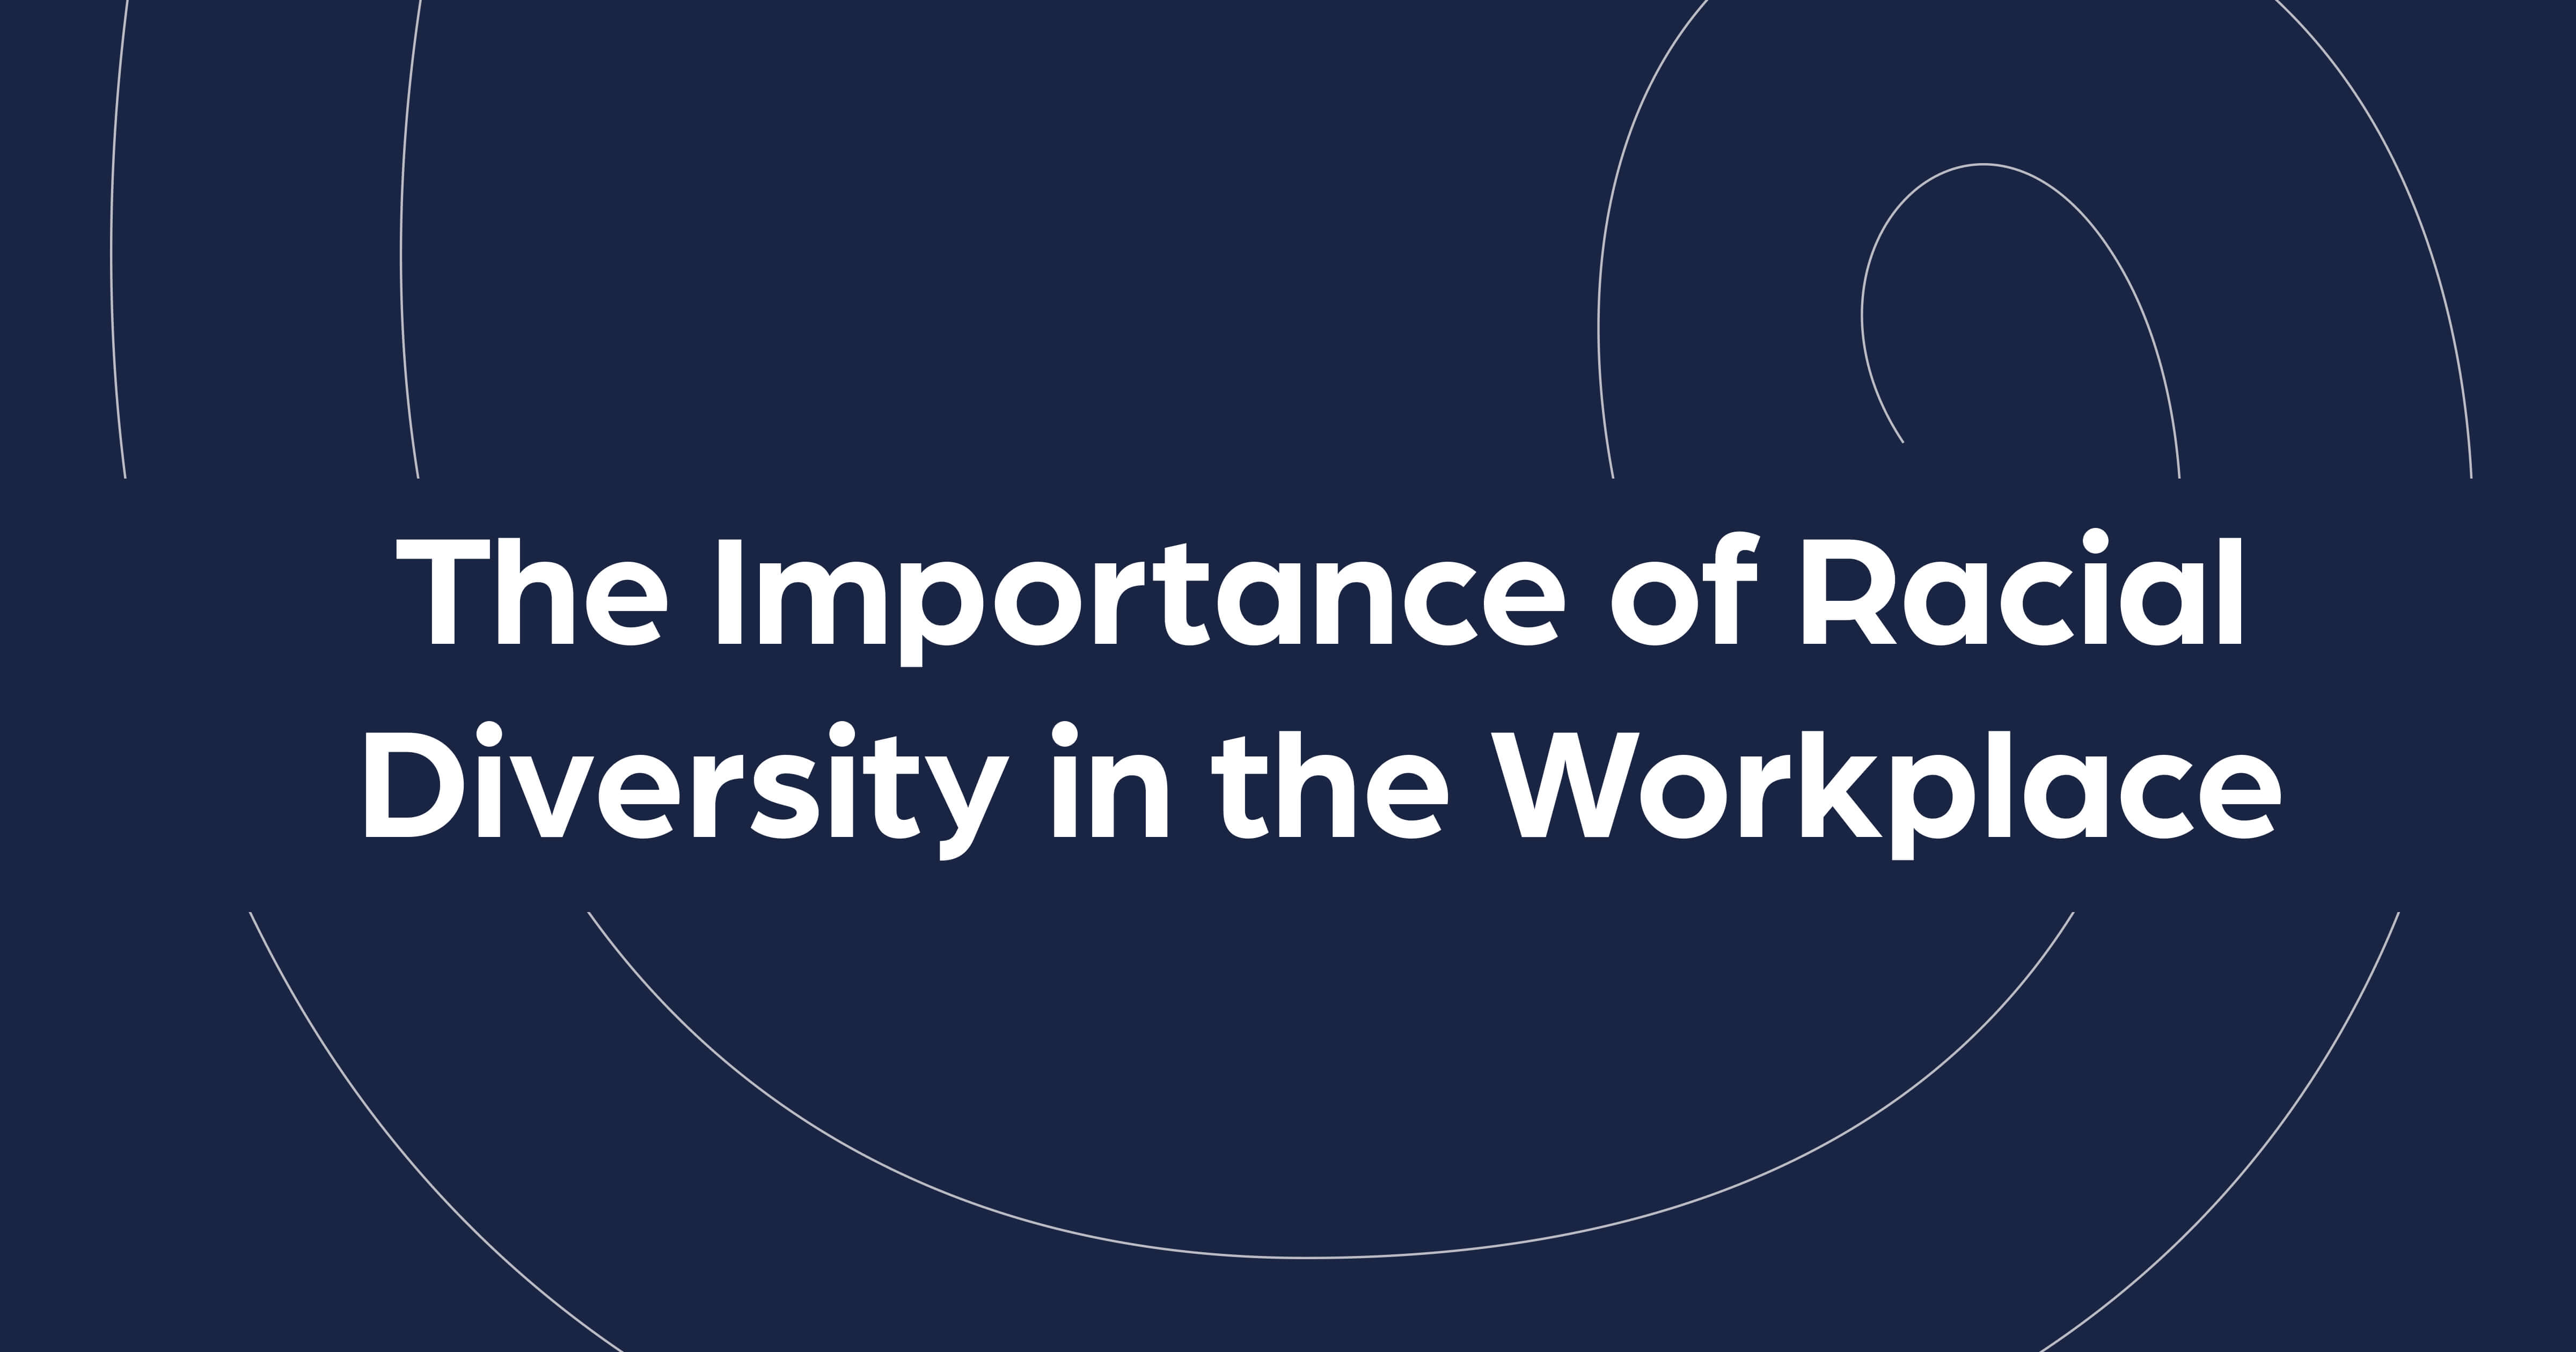 The Importance of Racial Diversity in the Workplace